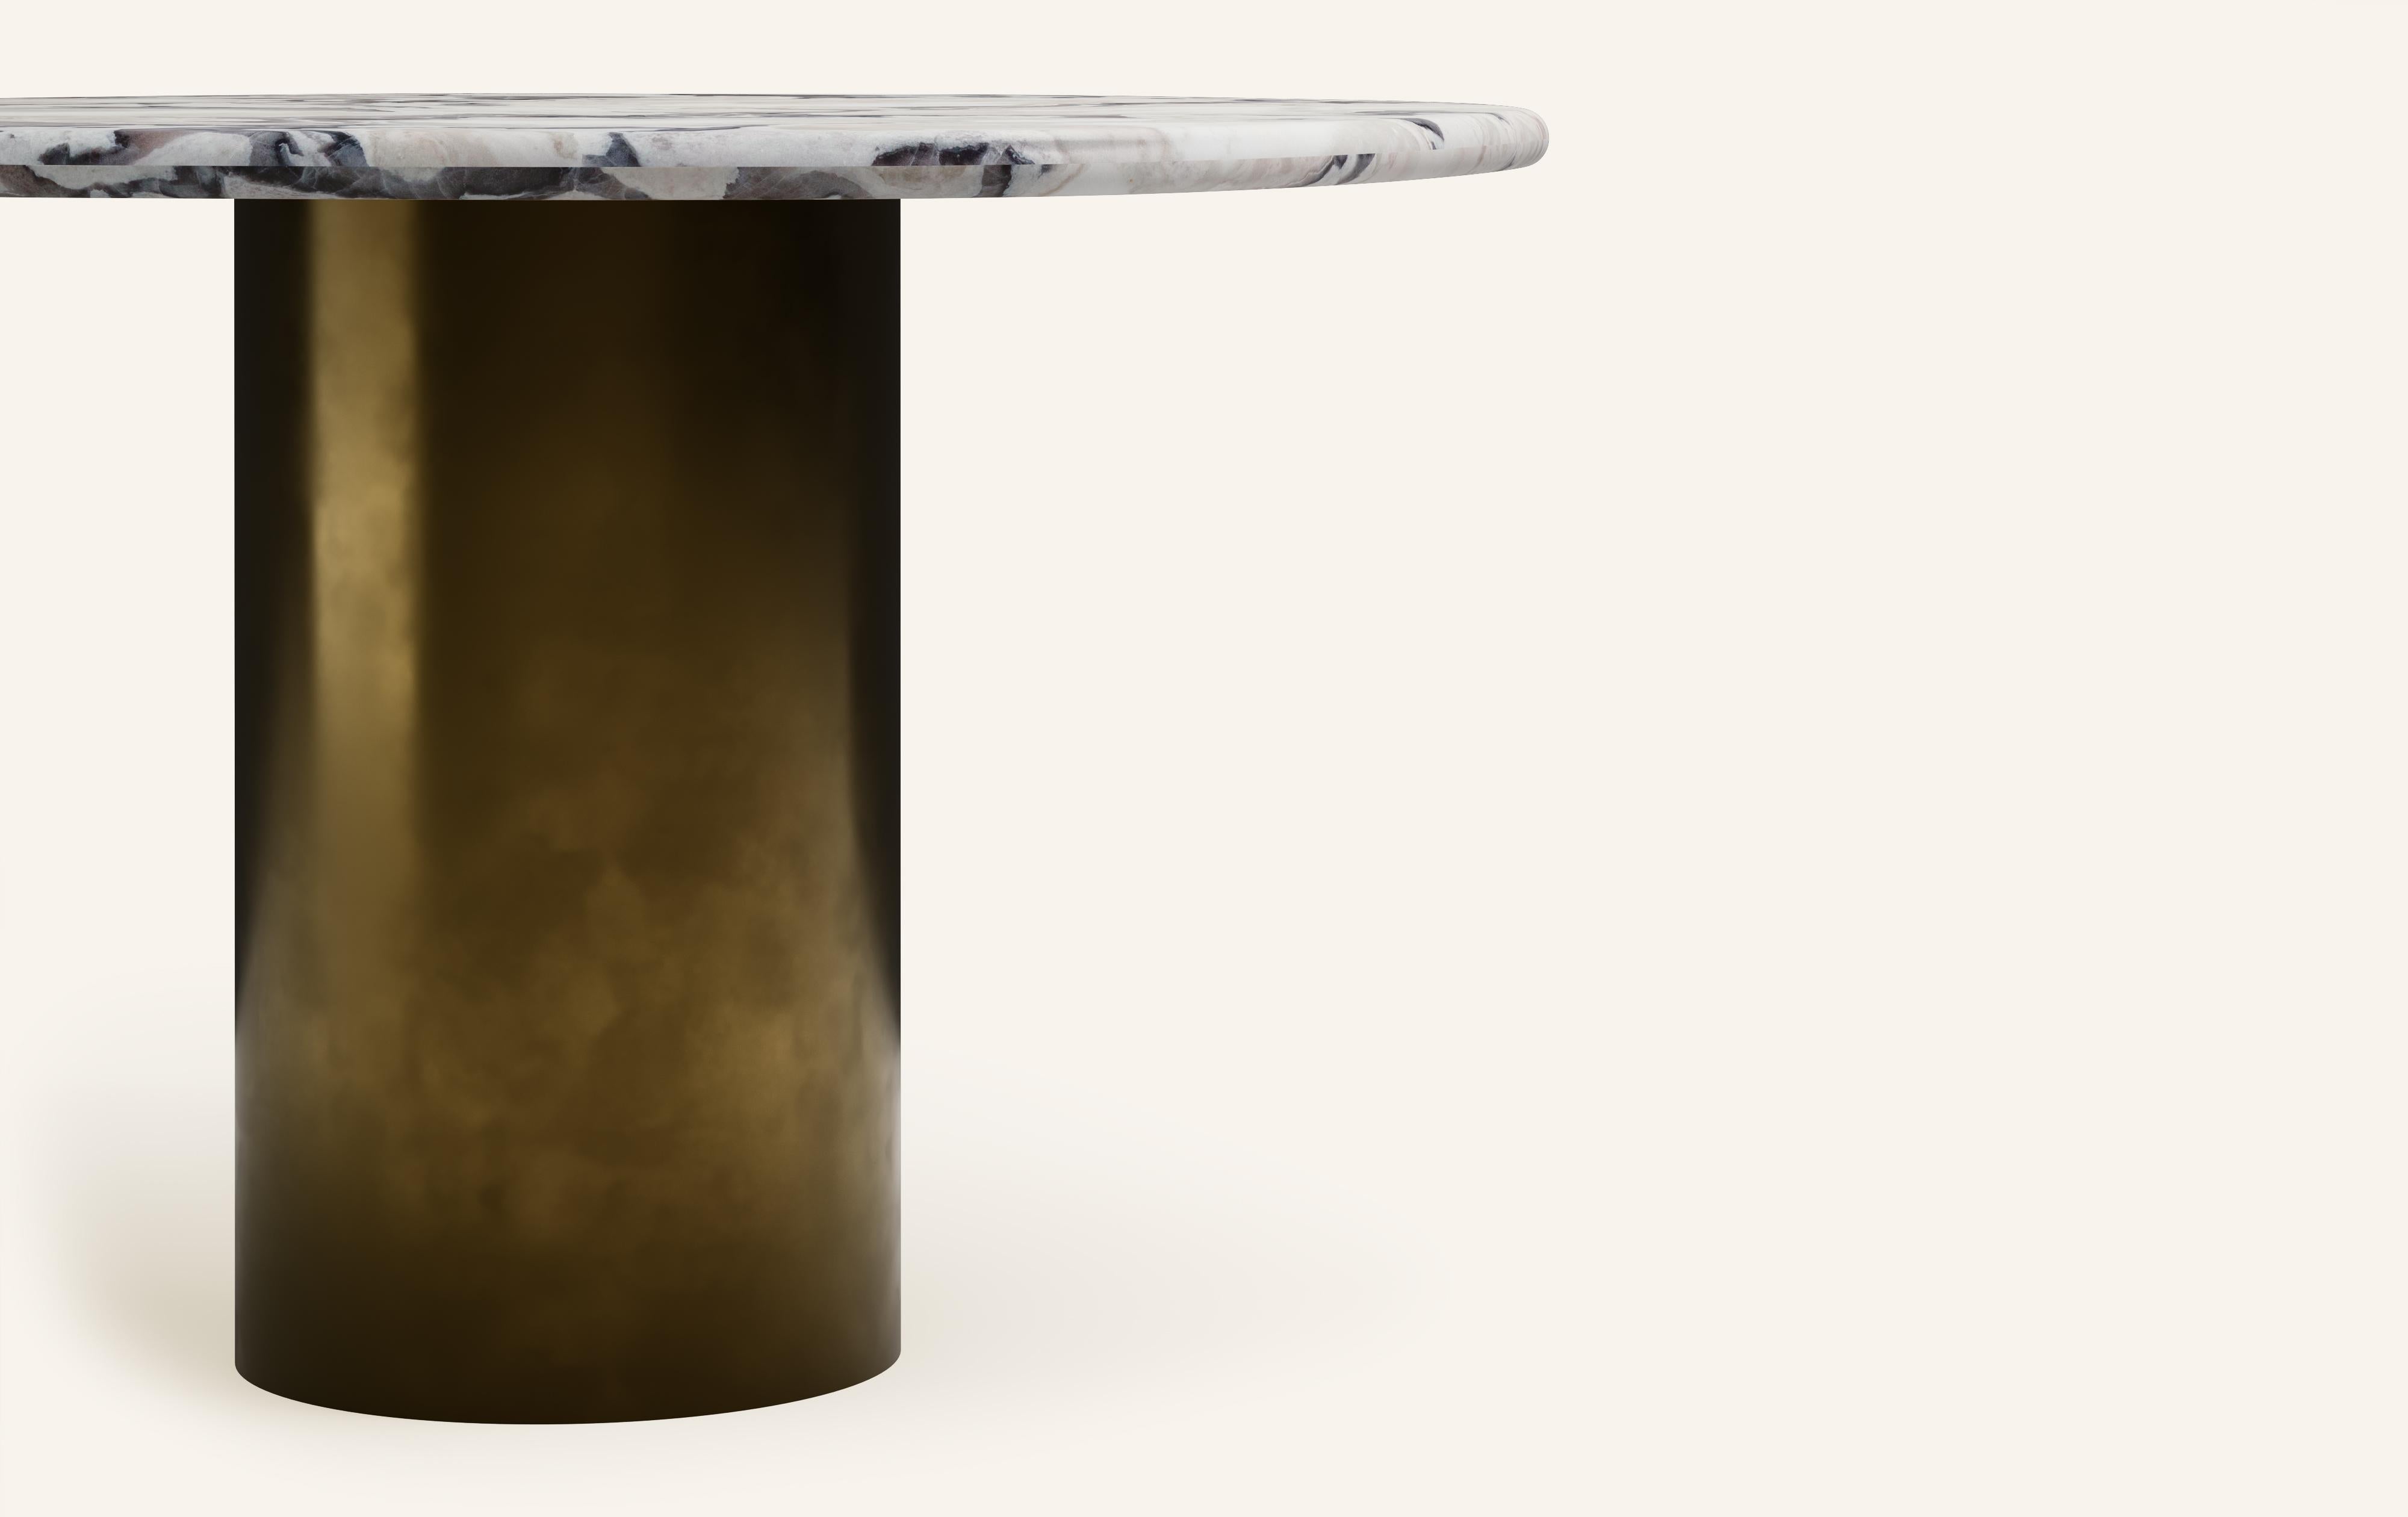 Organic Modern FORM(LA) Lago Round Dining Table 60”L x 60”W x 30”H Oyster Marble & Bronze For Sale